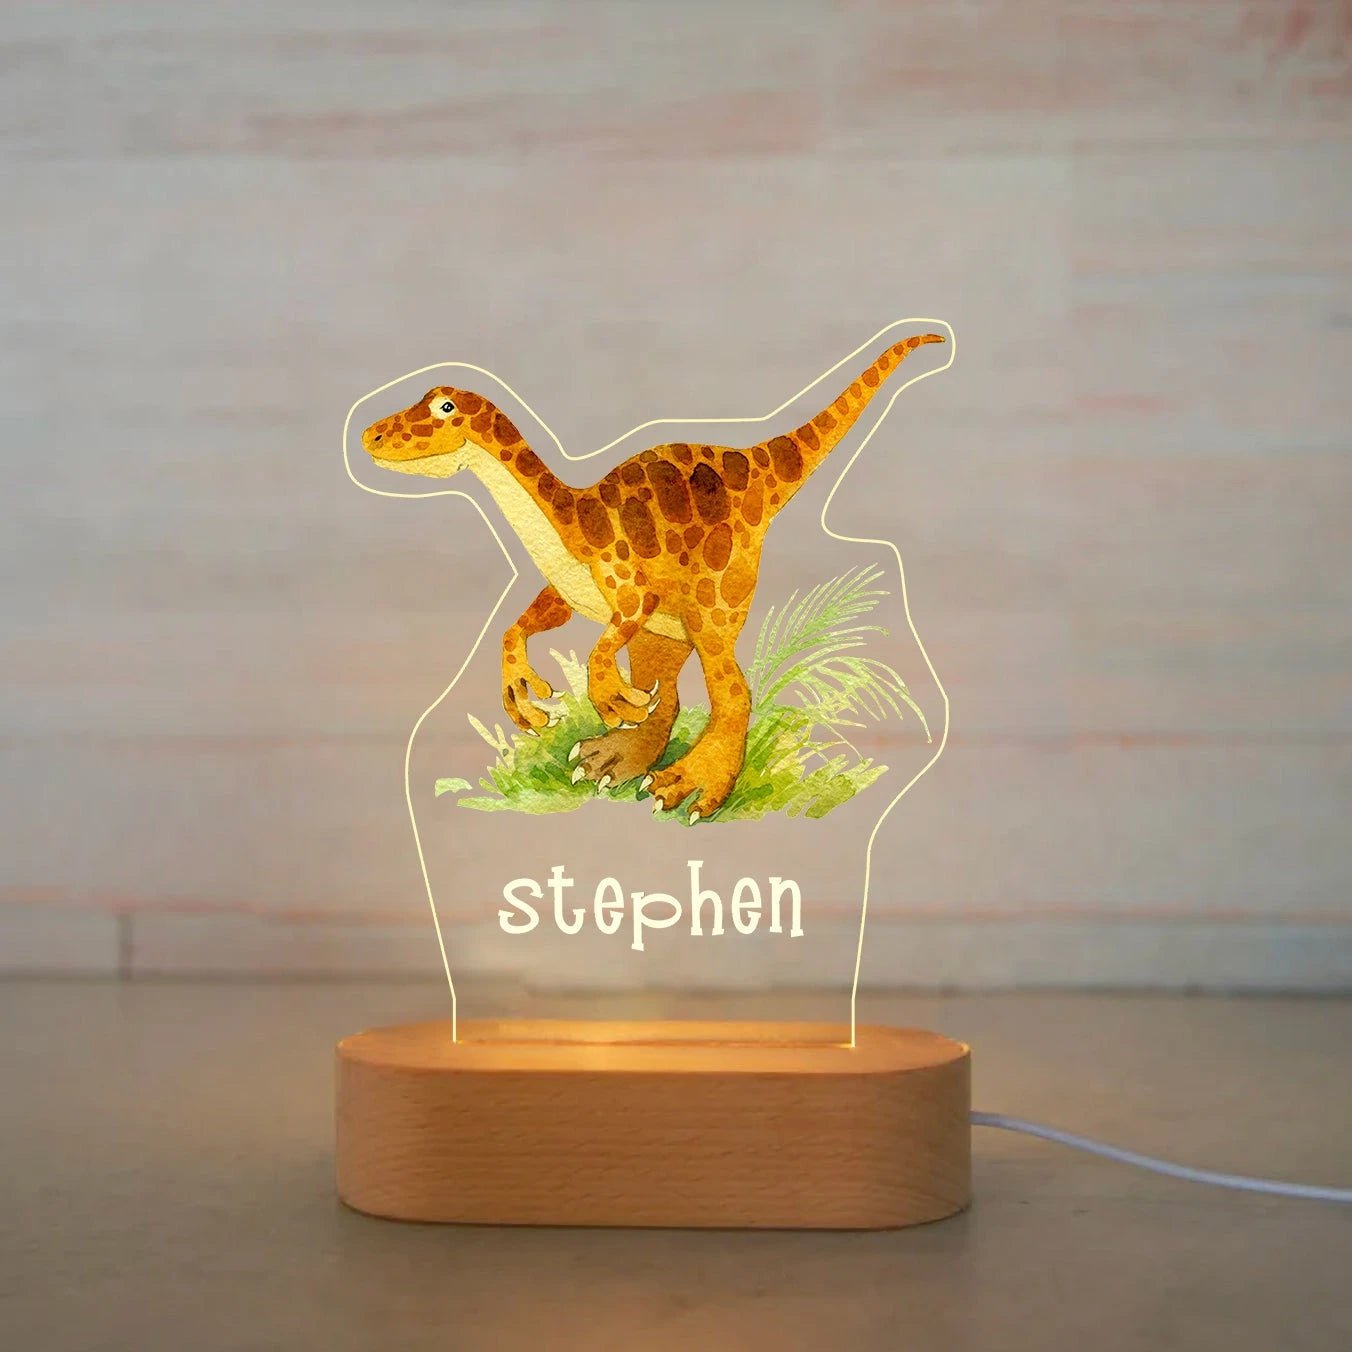 Customized Animal-themed Night Light for Kids - Personalized with Child's Name, Acrylic Lamp for Bedroom Decor Warm Light / 20Dinosaur